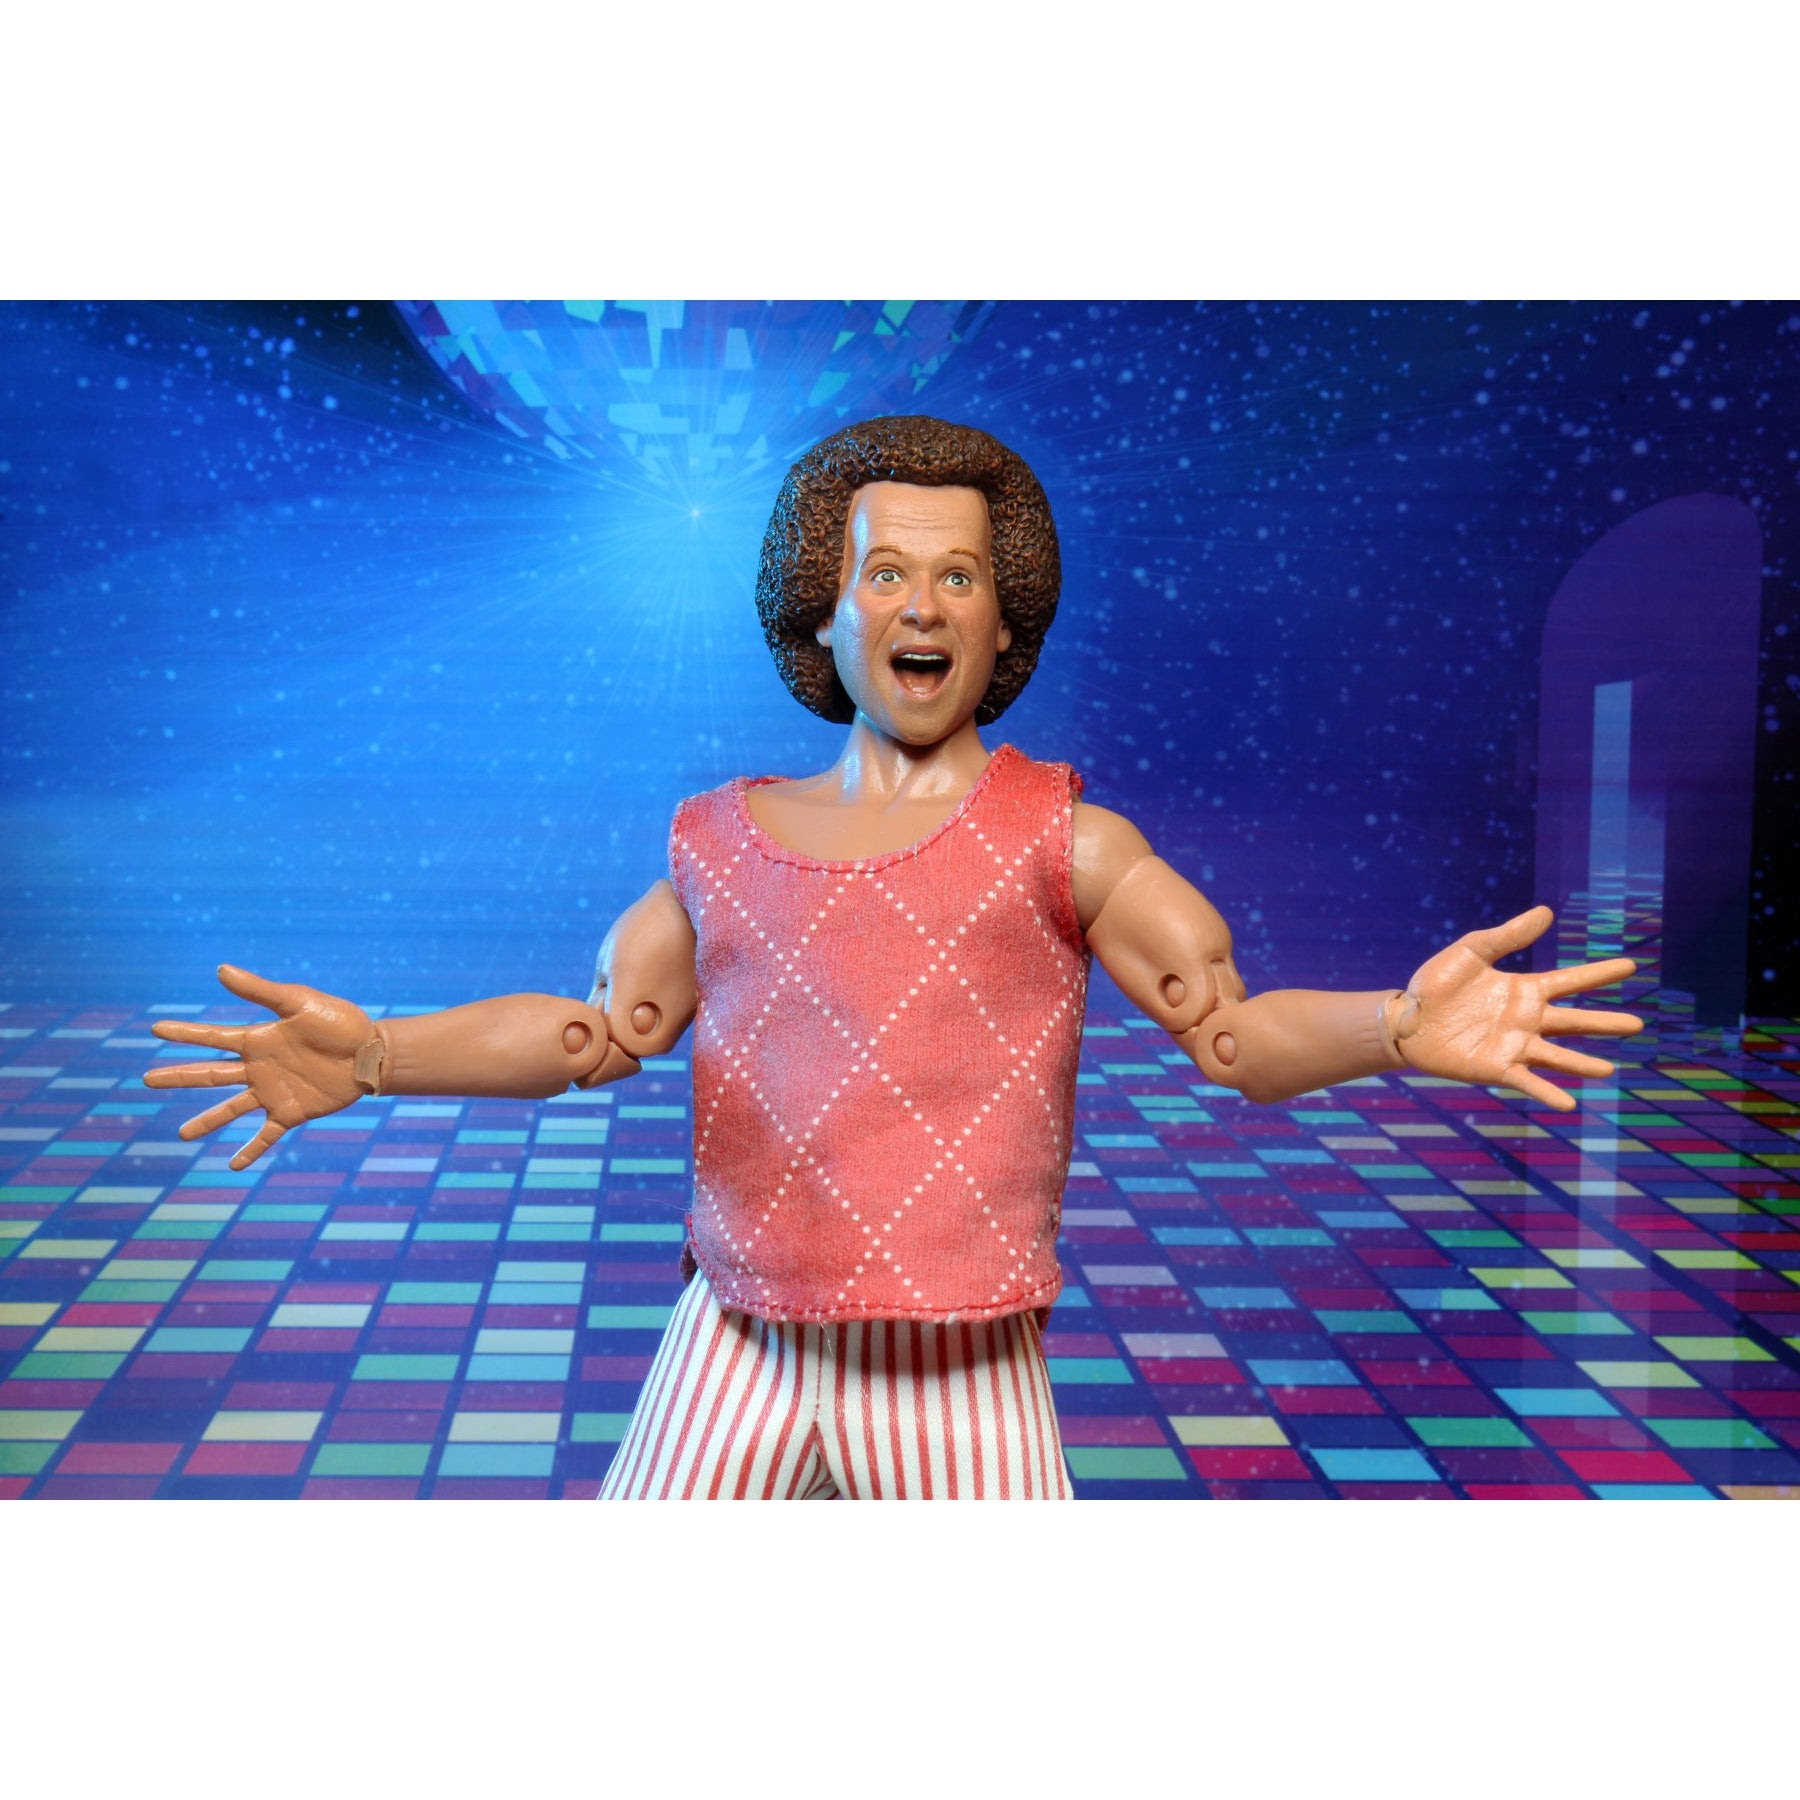 Image of Richard Simmons 8" Action Figure - SEPTEMBER 2020